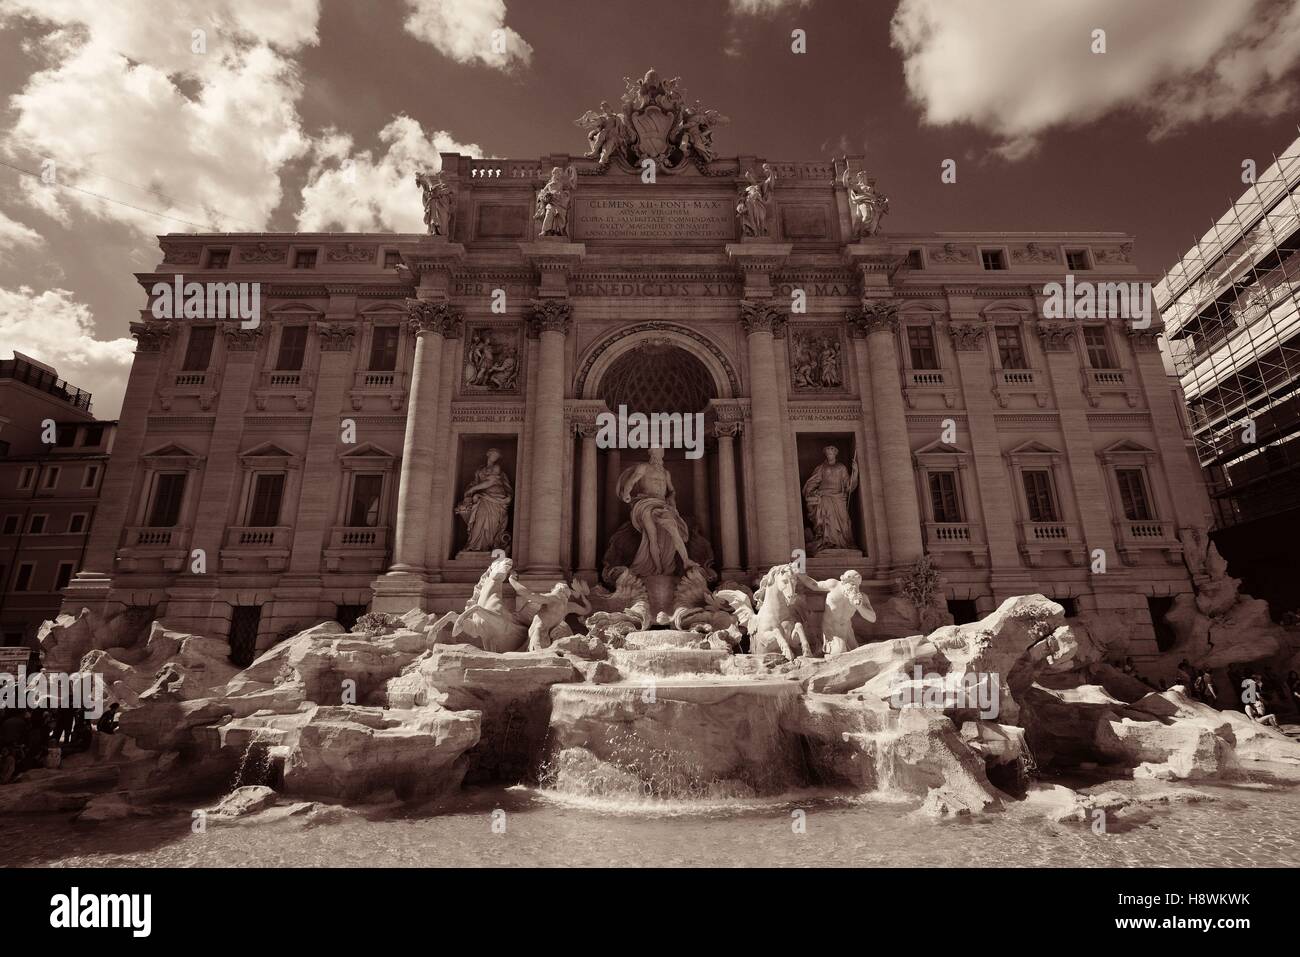 ROME - MAY 12: Trevi Fountain in day time on May 12, 2016 in Rome, Italy. Rome ranked 14th in the world, and 1st the most popular tourism attraction in Italy. Stock Photo